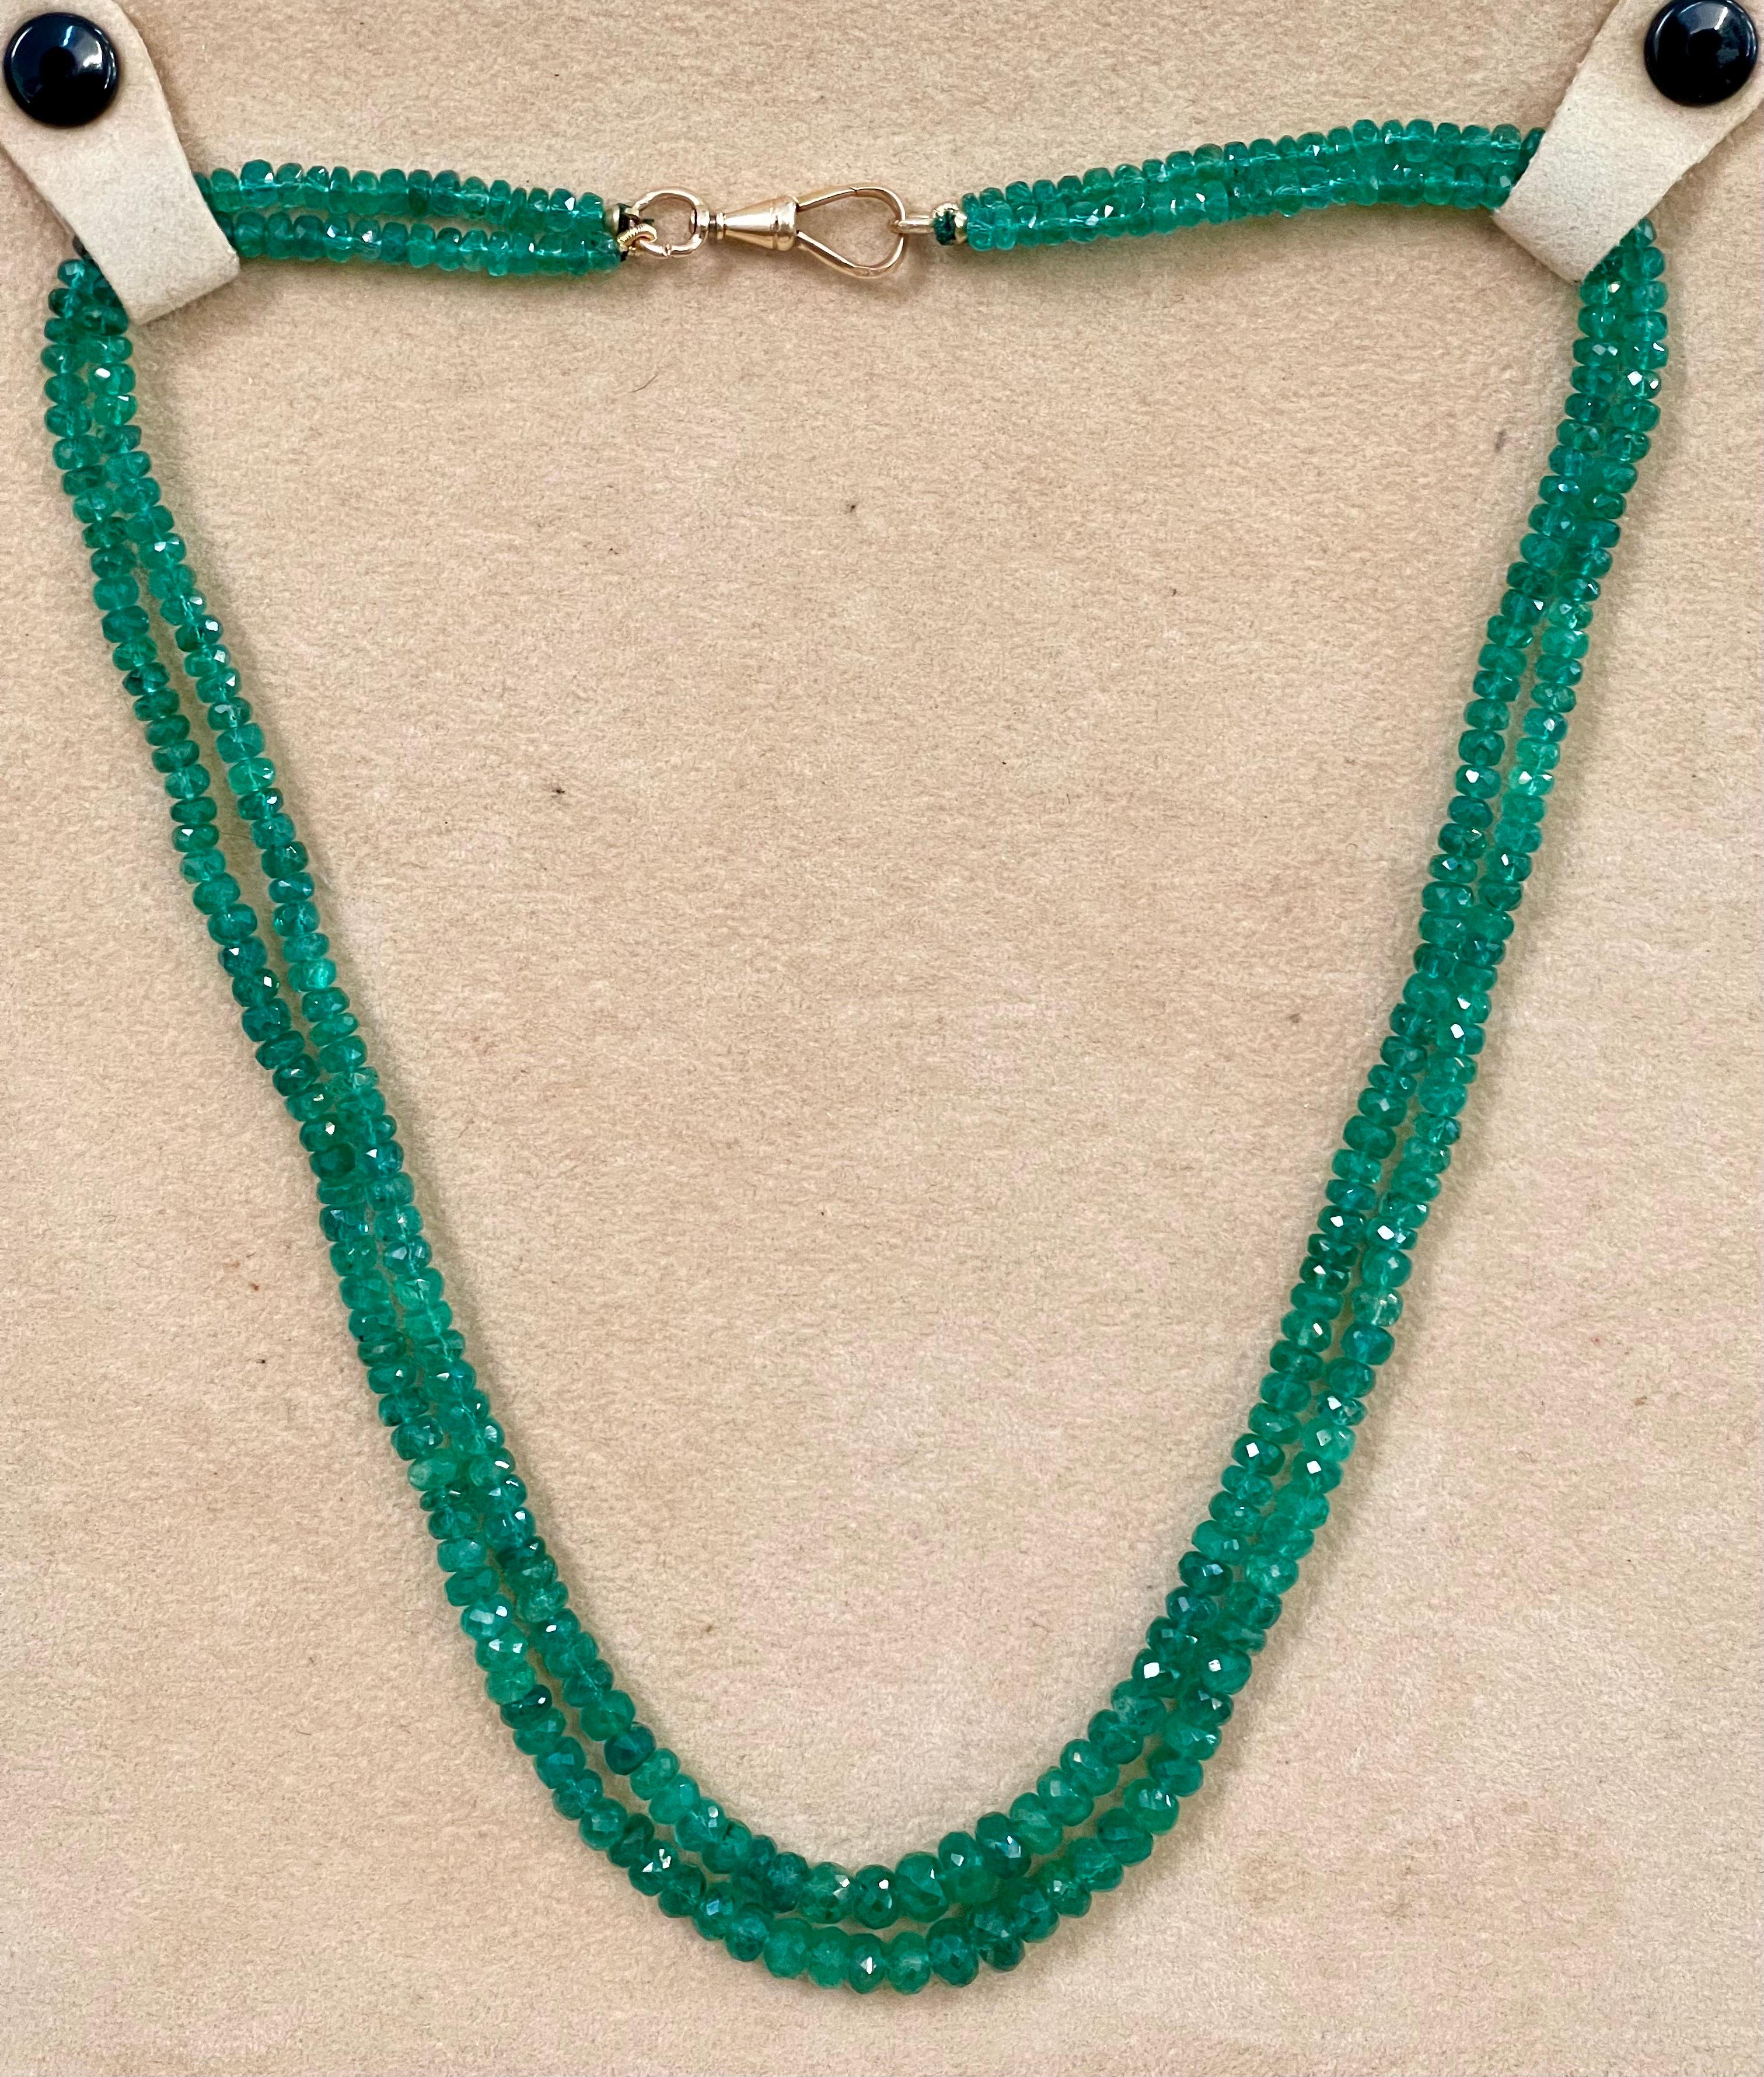 Women's 145 Ct Fine Natural Emerald Beads 2 Line Necklace with 14 Kt Yellow Gold Clasp For Sale